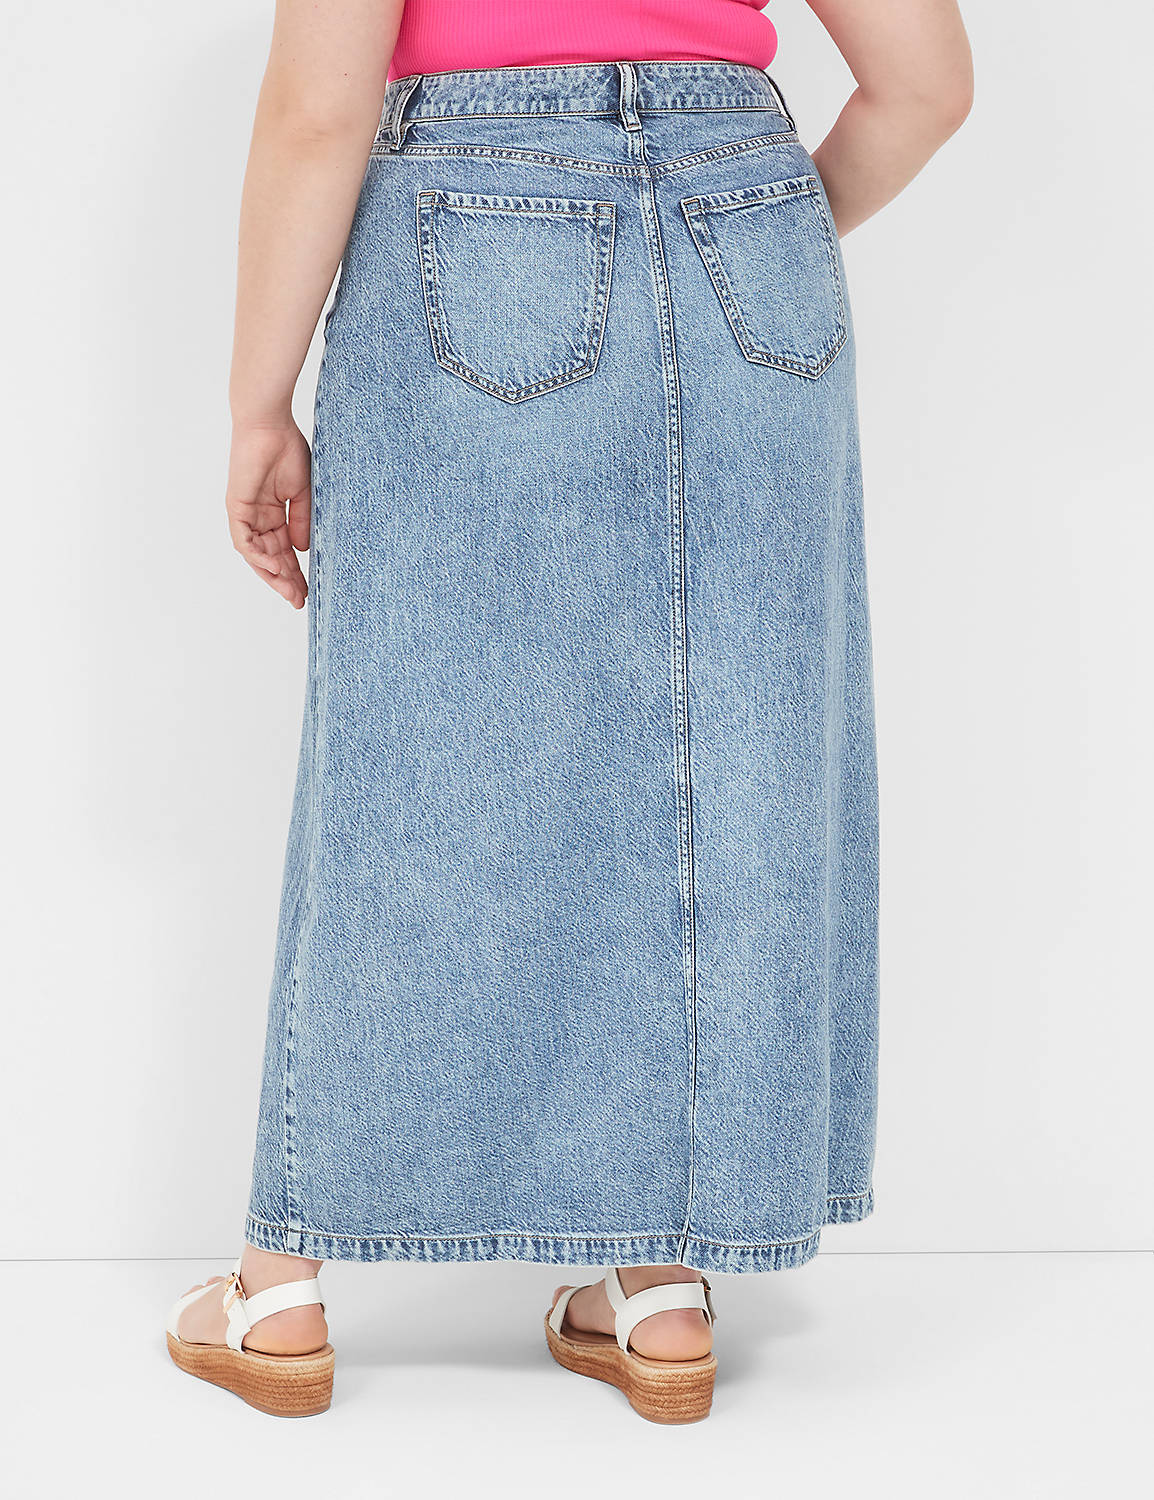 DENIM MAXI SKIRT HIGH RISE- FRONT S Product Image 2